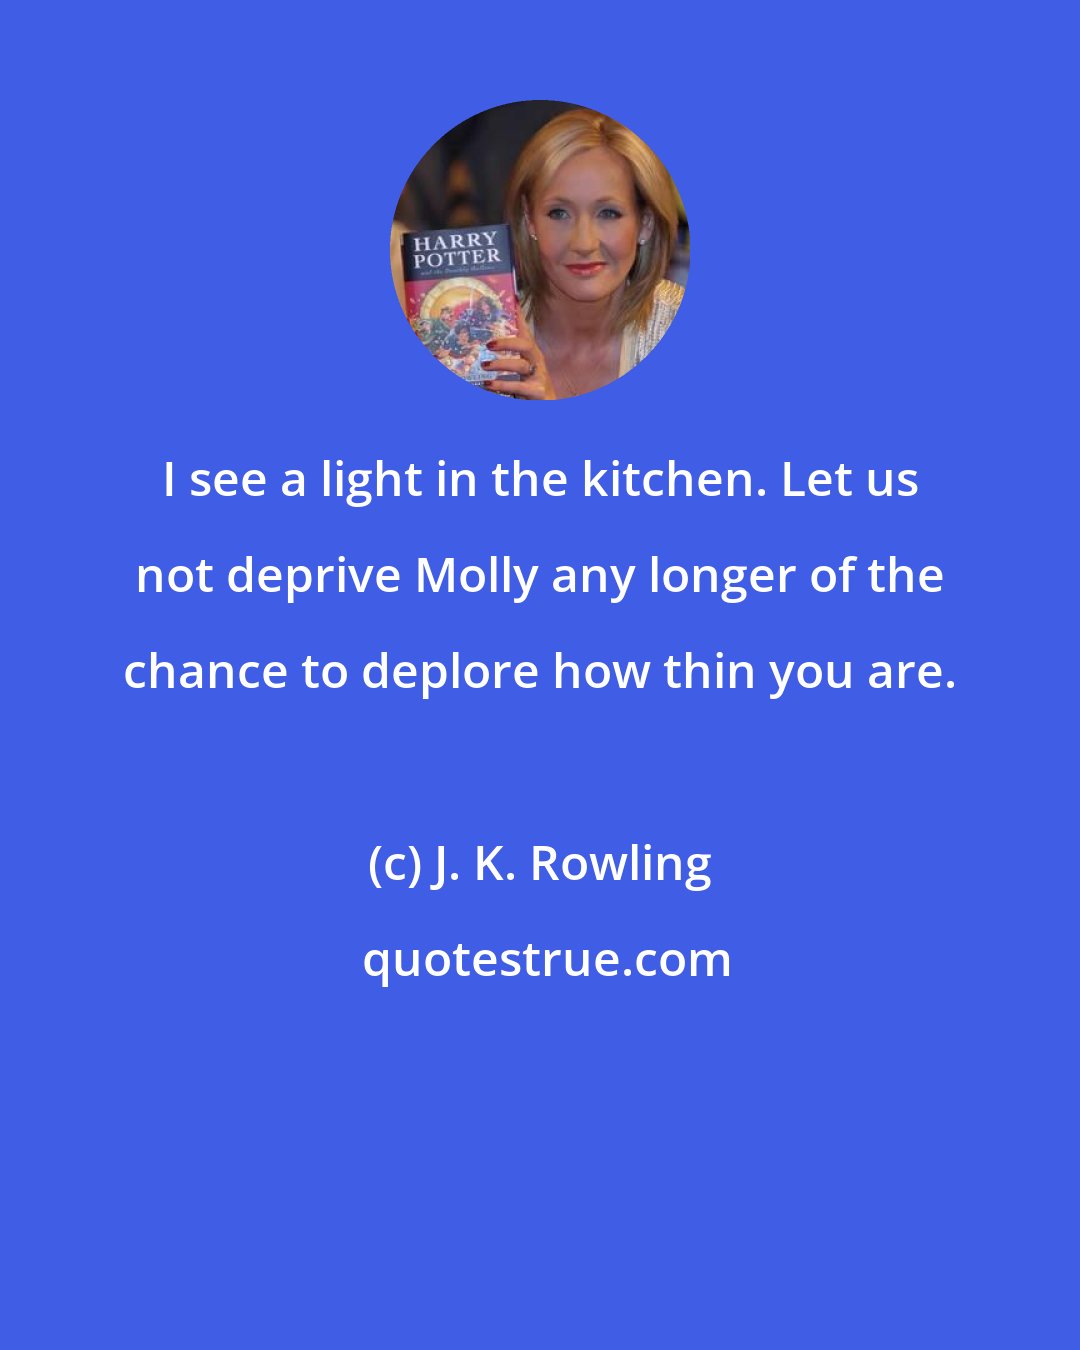 J. K. Rowling: I see a light in the kitchen. Let us not deprive Molly any longer of the chance to deplore how thin you are.